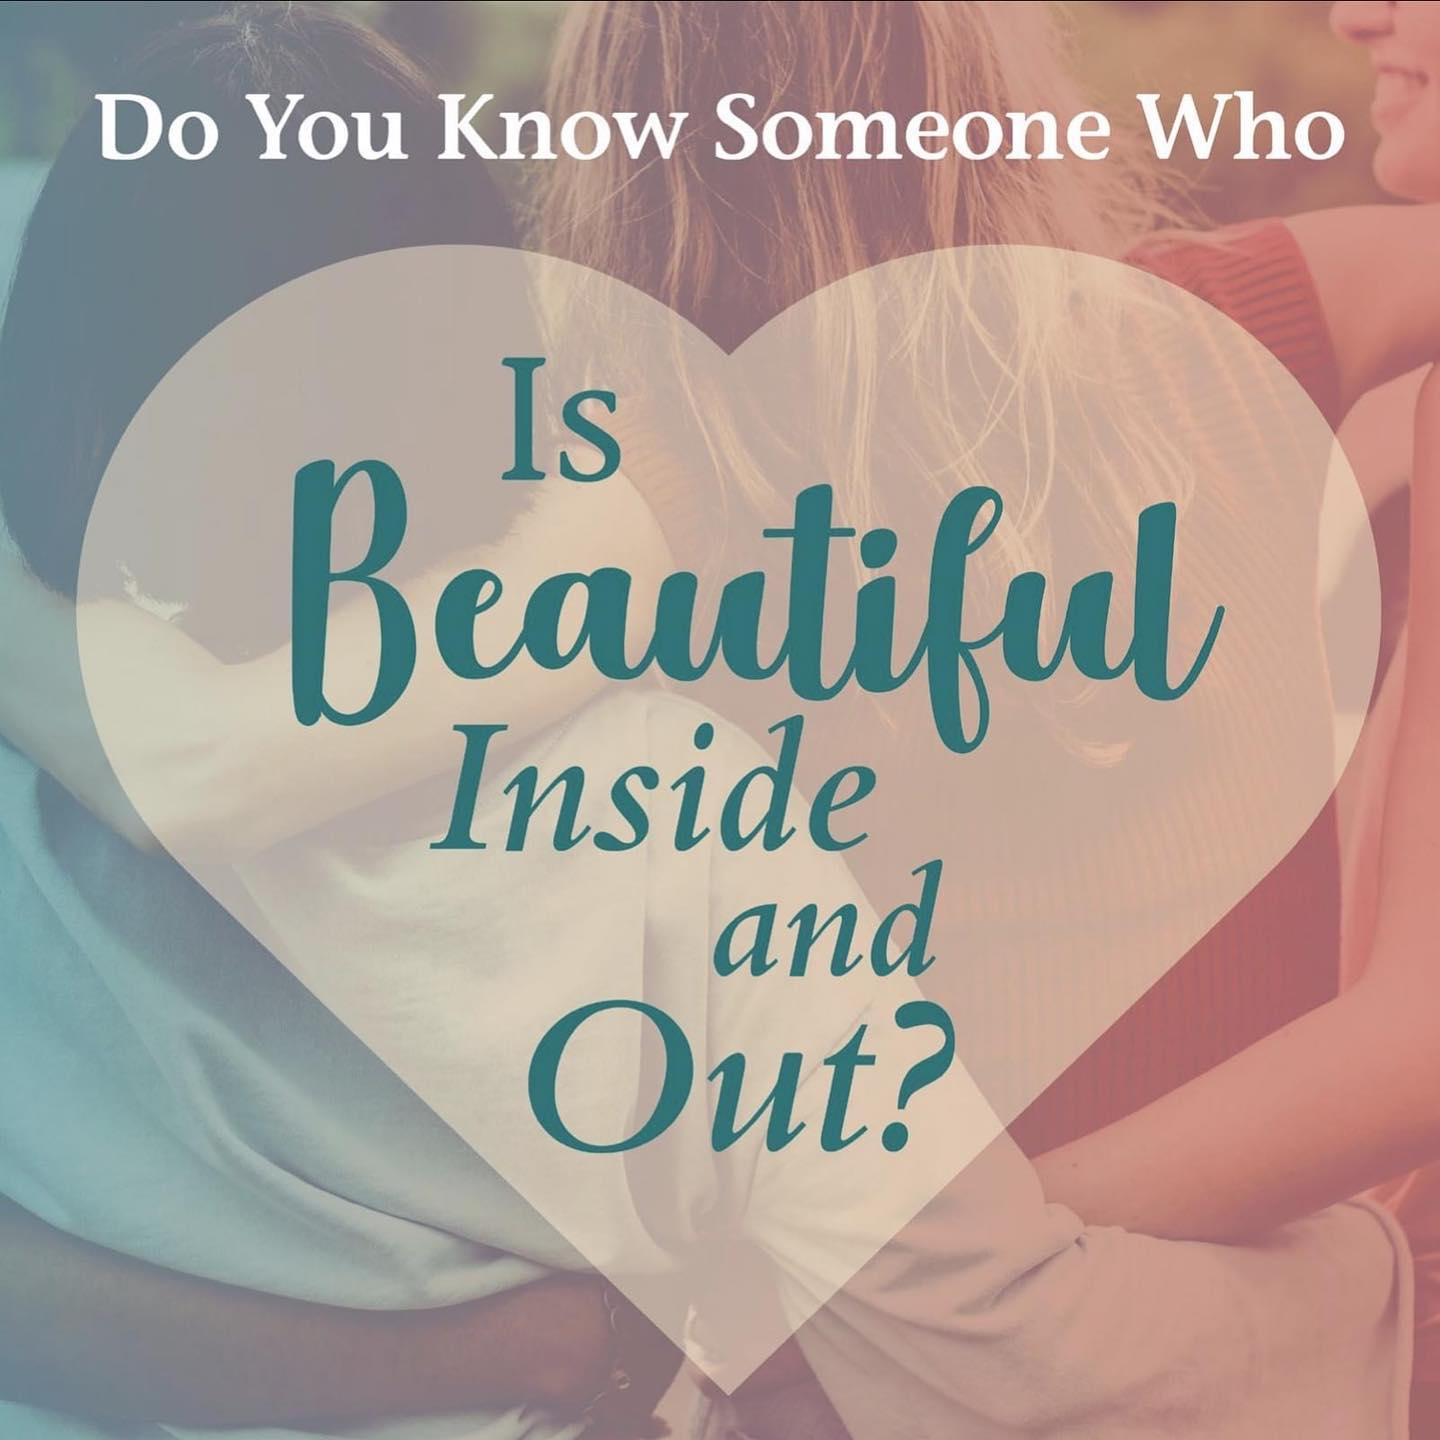 Do you know someone who is beautiful inside and out?